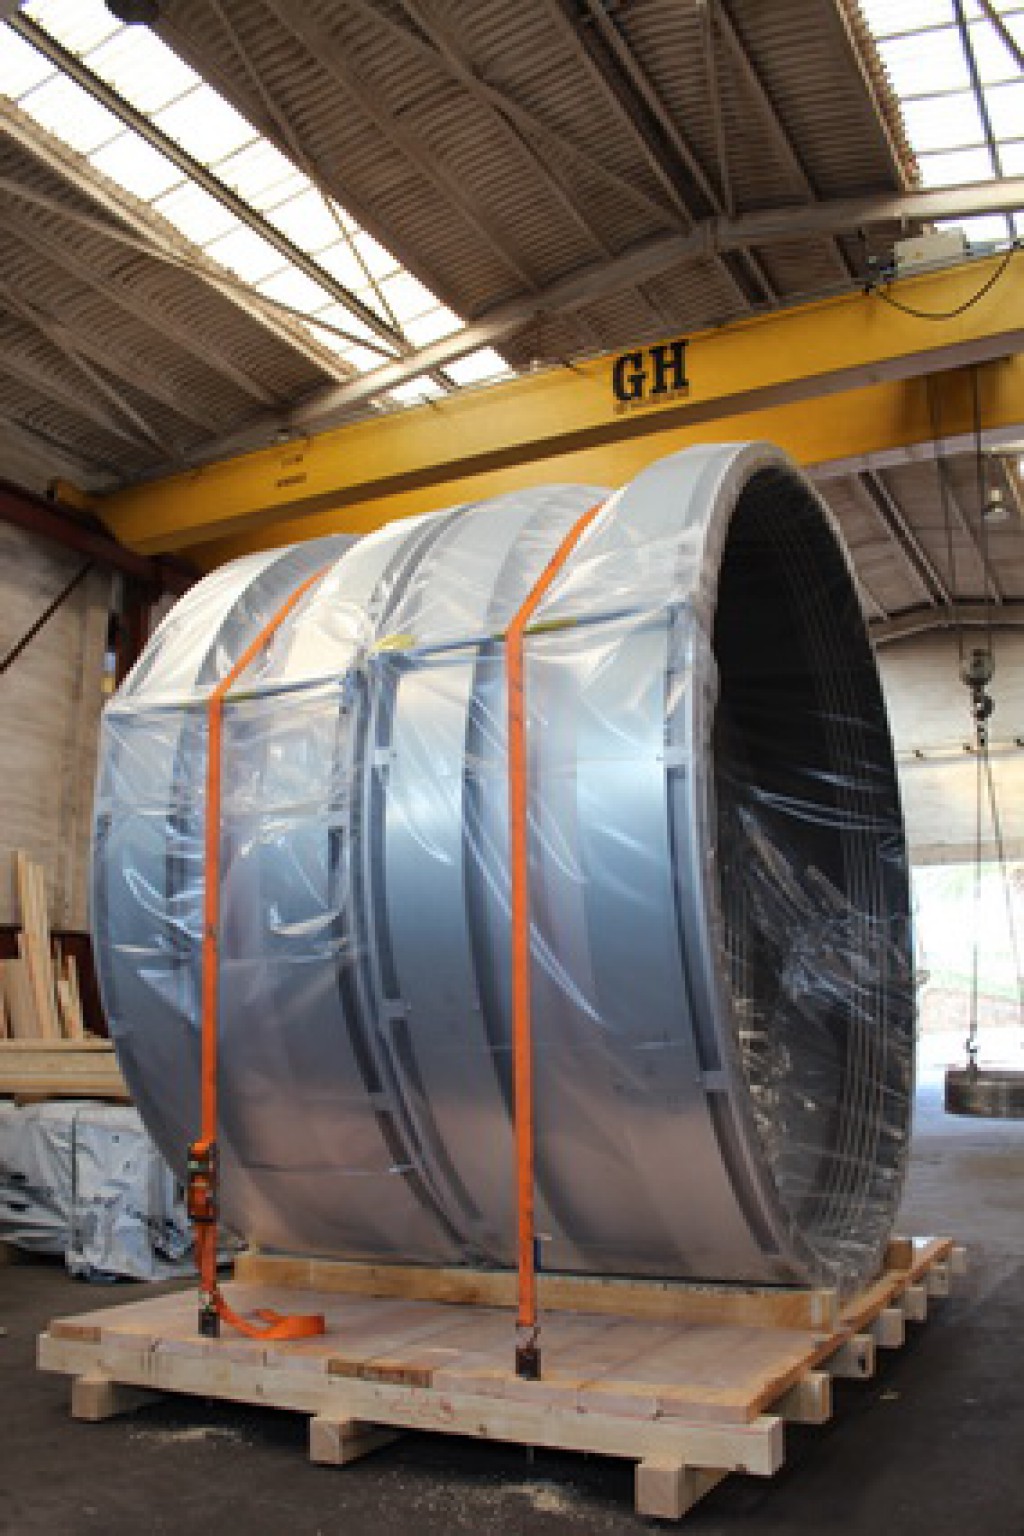 Oct. 2011 - MACOGA Expansion Joints for Internal Combustion Central Power Plant Baja California Sur III